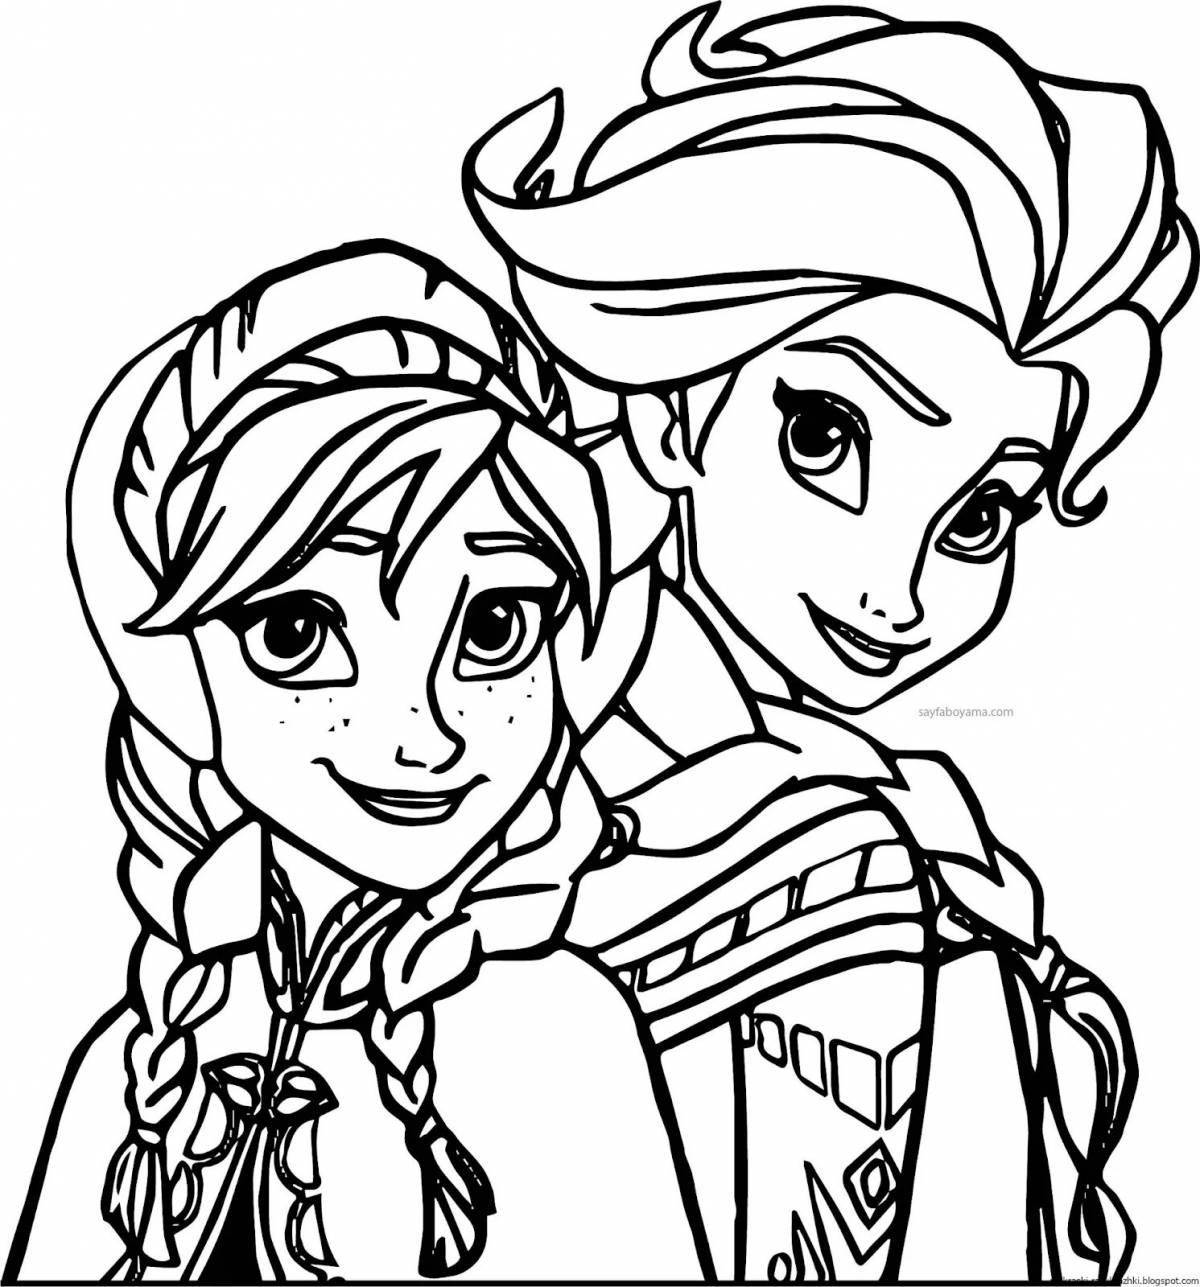 Anna's magic coloring book for kids